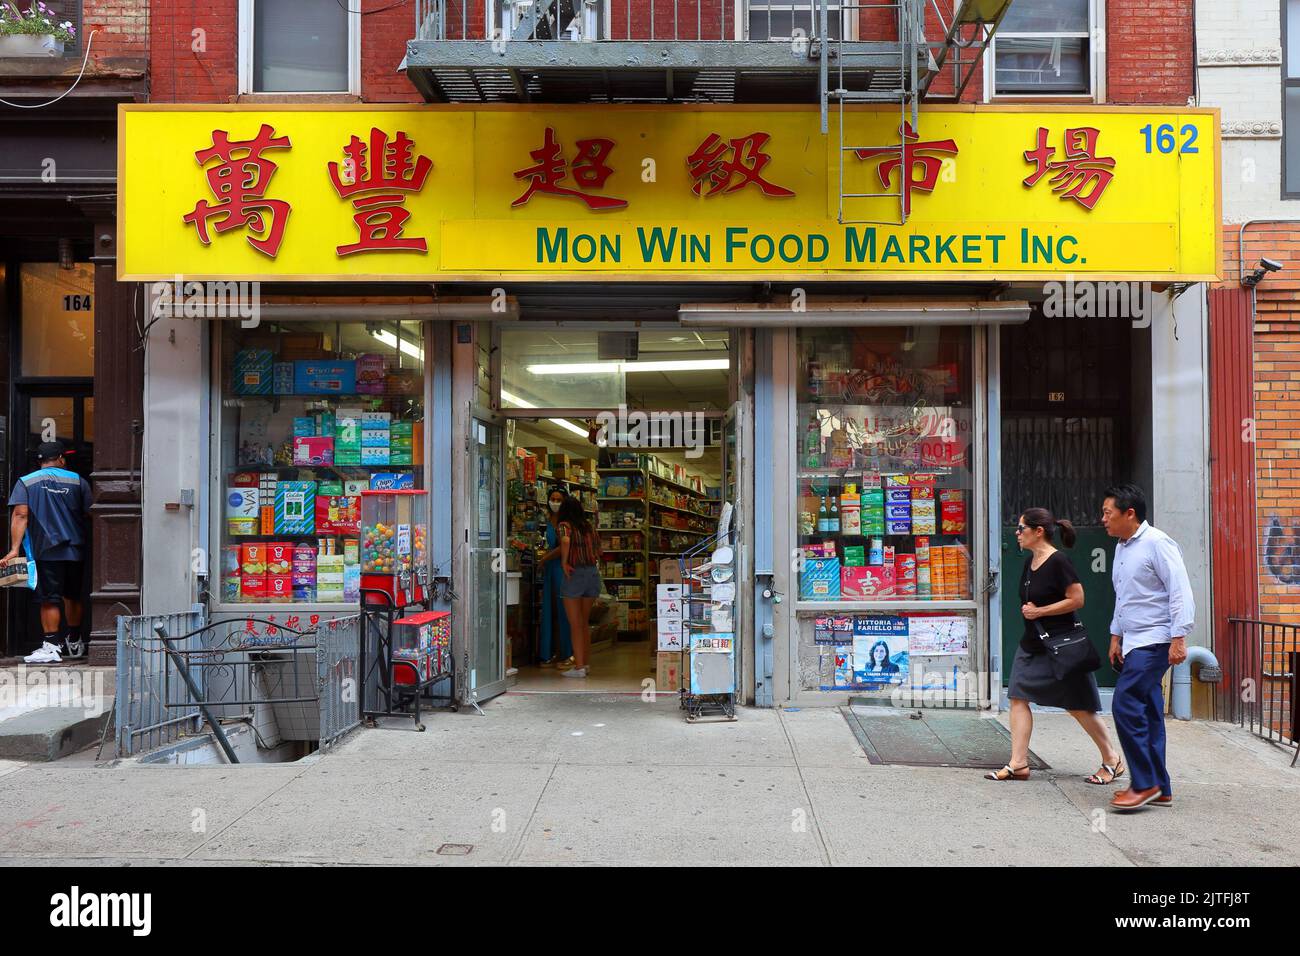 Mon Win Food Market, 162 Mott St, New York, NYC storefront photo of an Asian grocery store in Manhattan Chinatown. grand win supermarket. Stock Photo